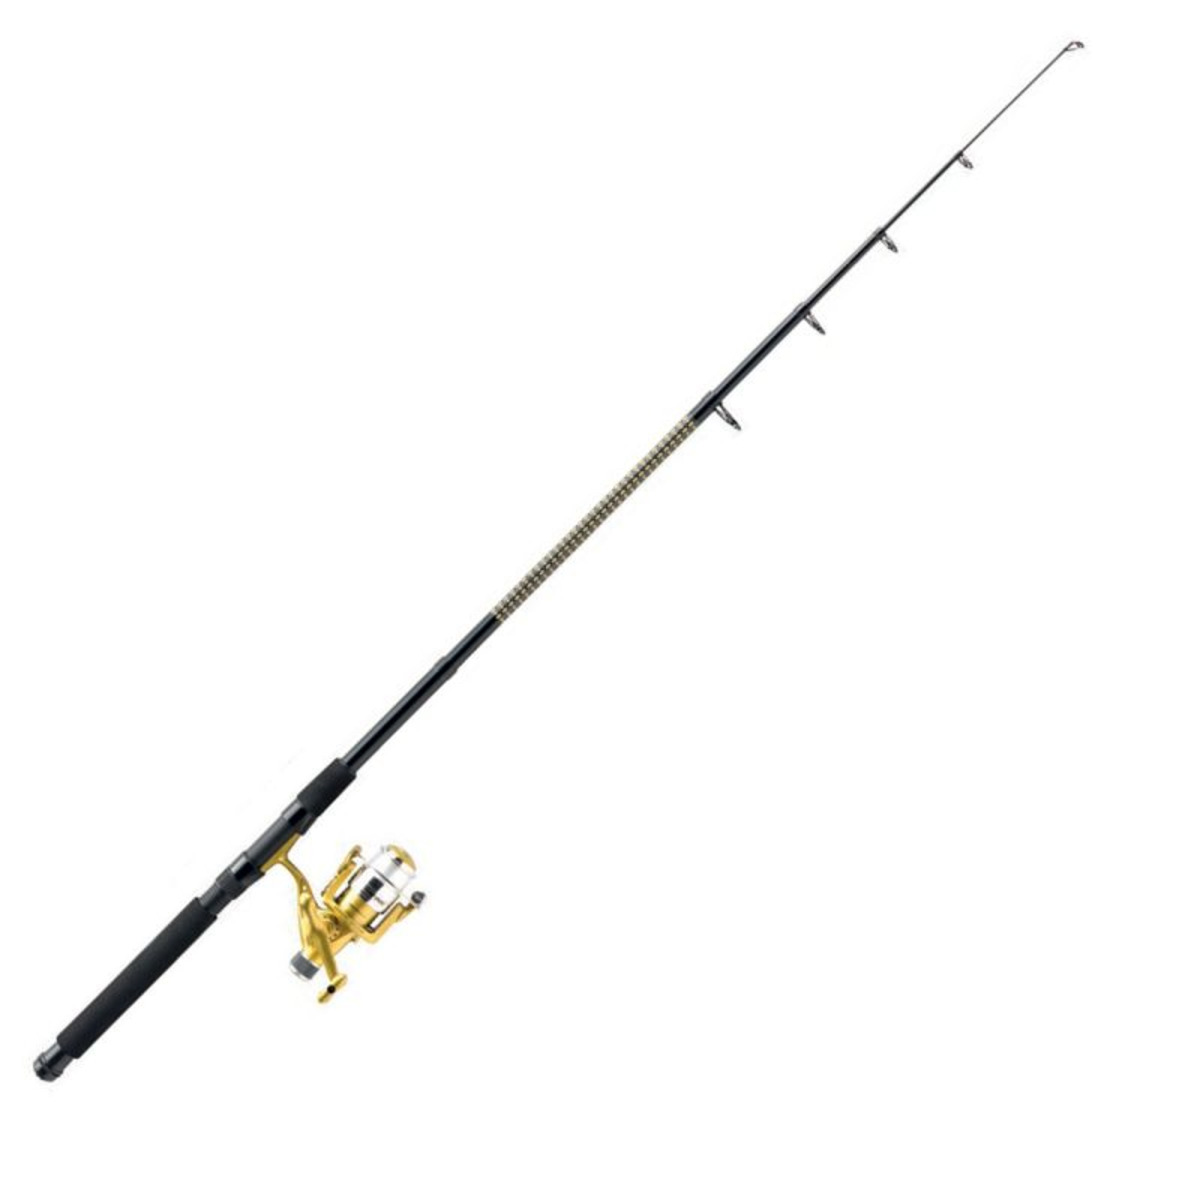 Mitchell GT Pro Spin Telescopic - 2.40 m - 10-50 g - Reel 3000 RD